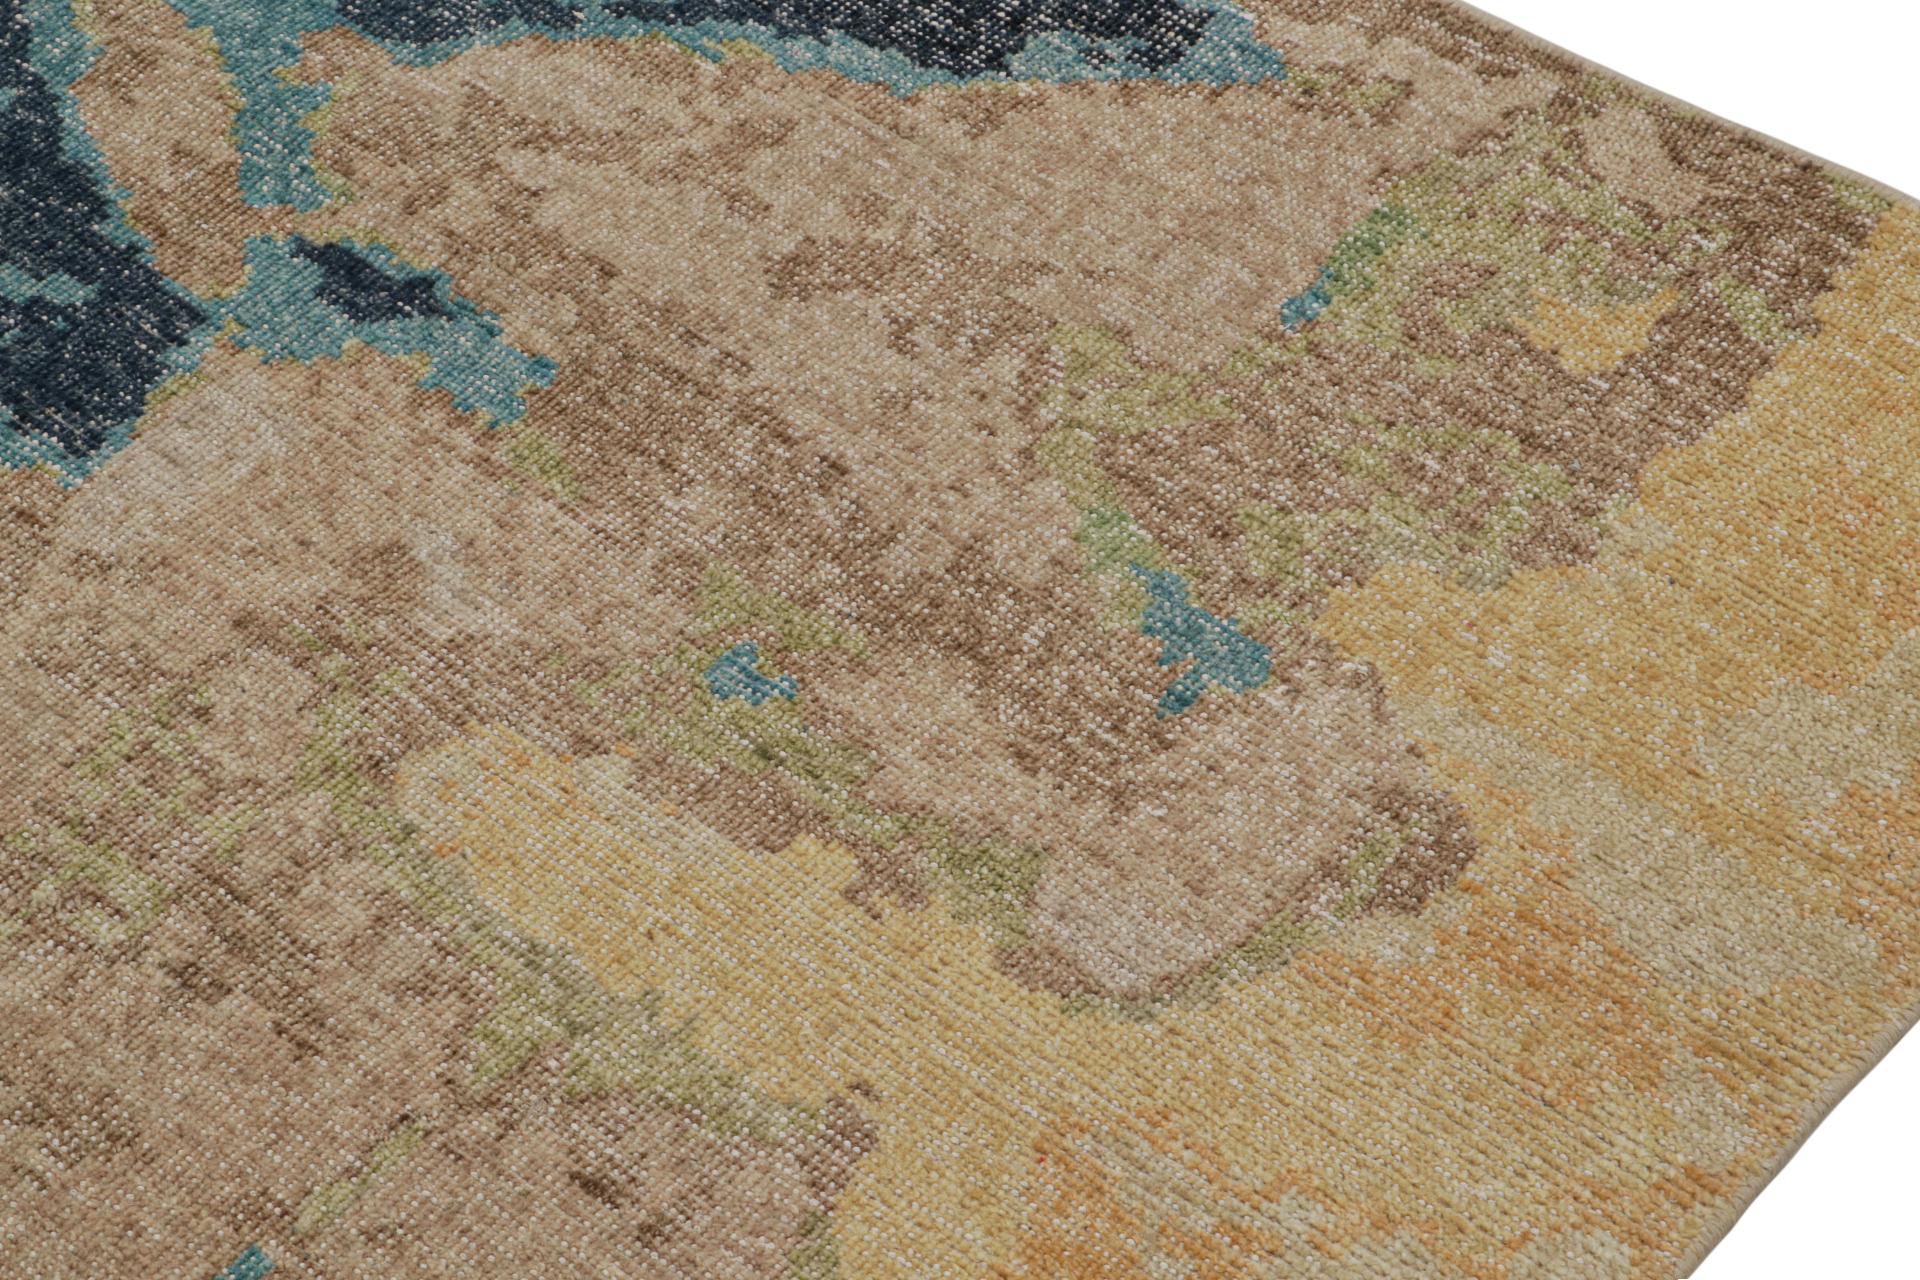 Rug & Kilim’s Modern Distressed Abstract Rug in Green, Beige-Brown and Blue In New Condition For Sale In Long Island City, NY